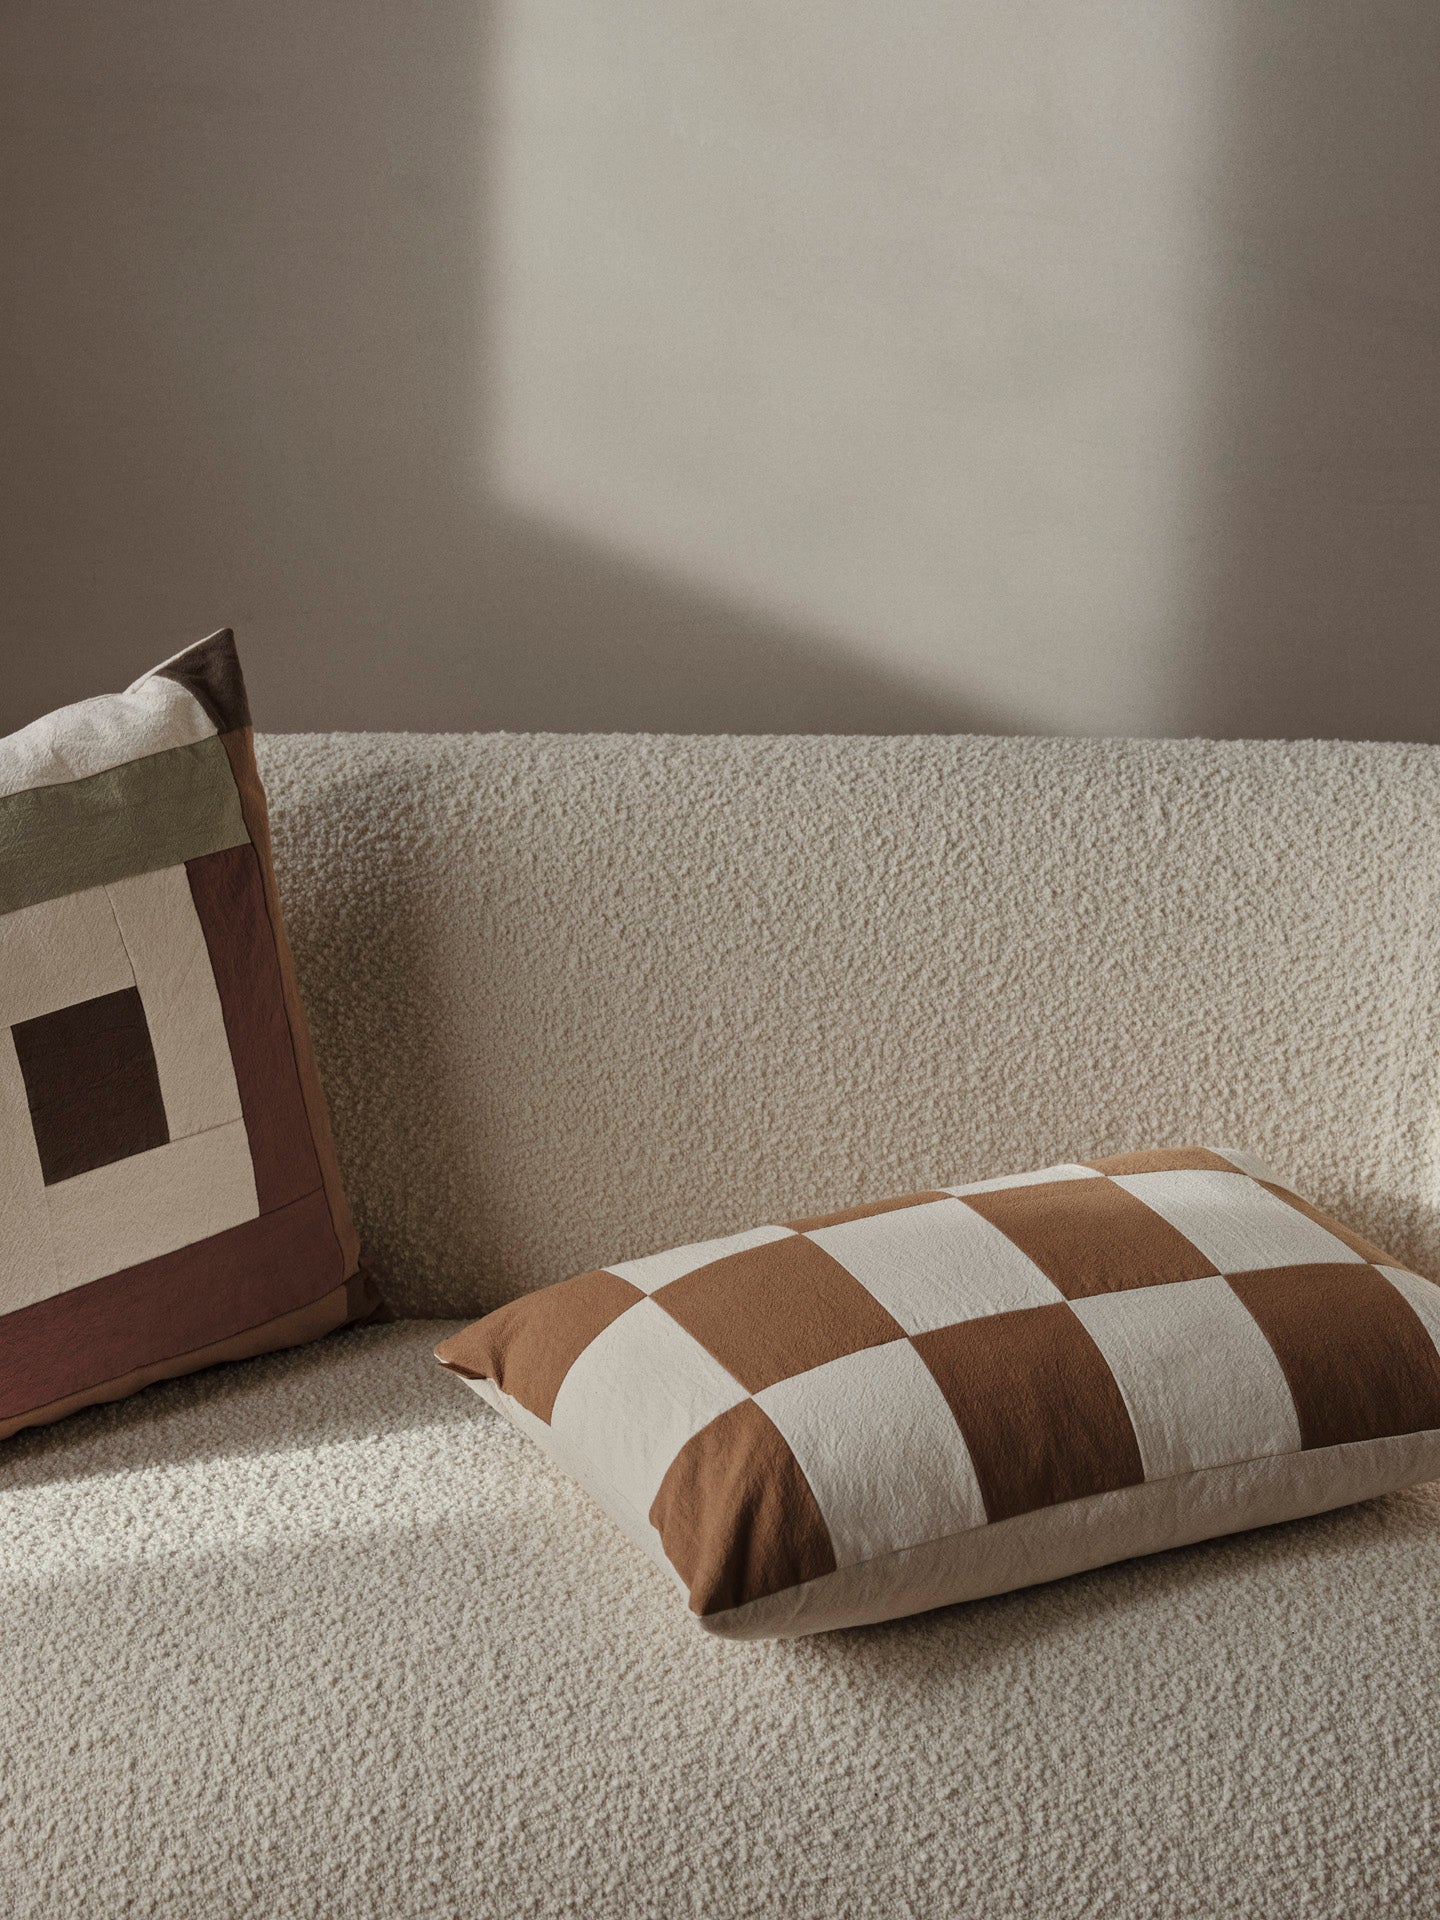 Fold Patchwork Pillow - More Options